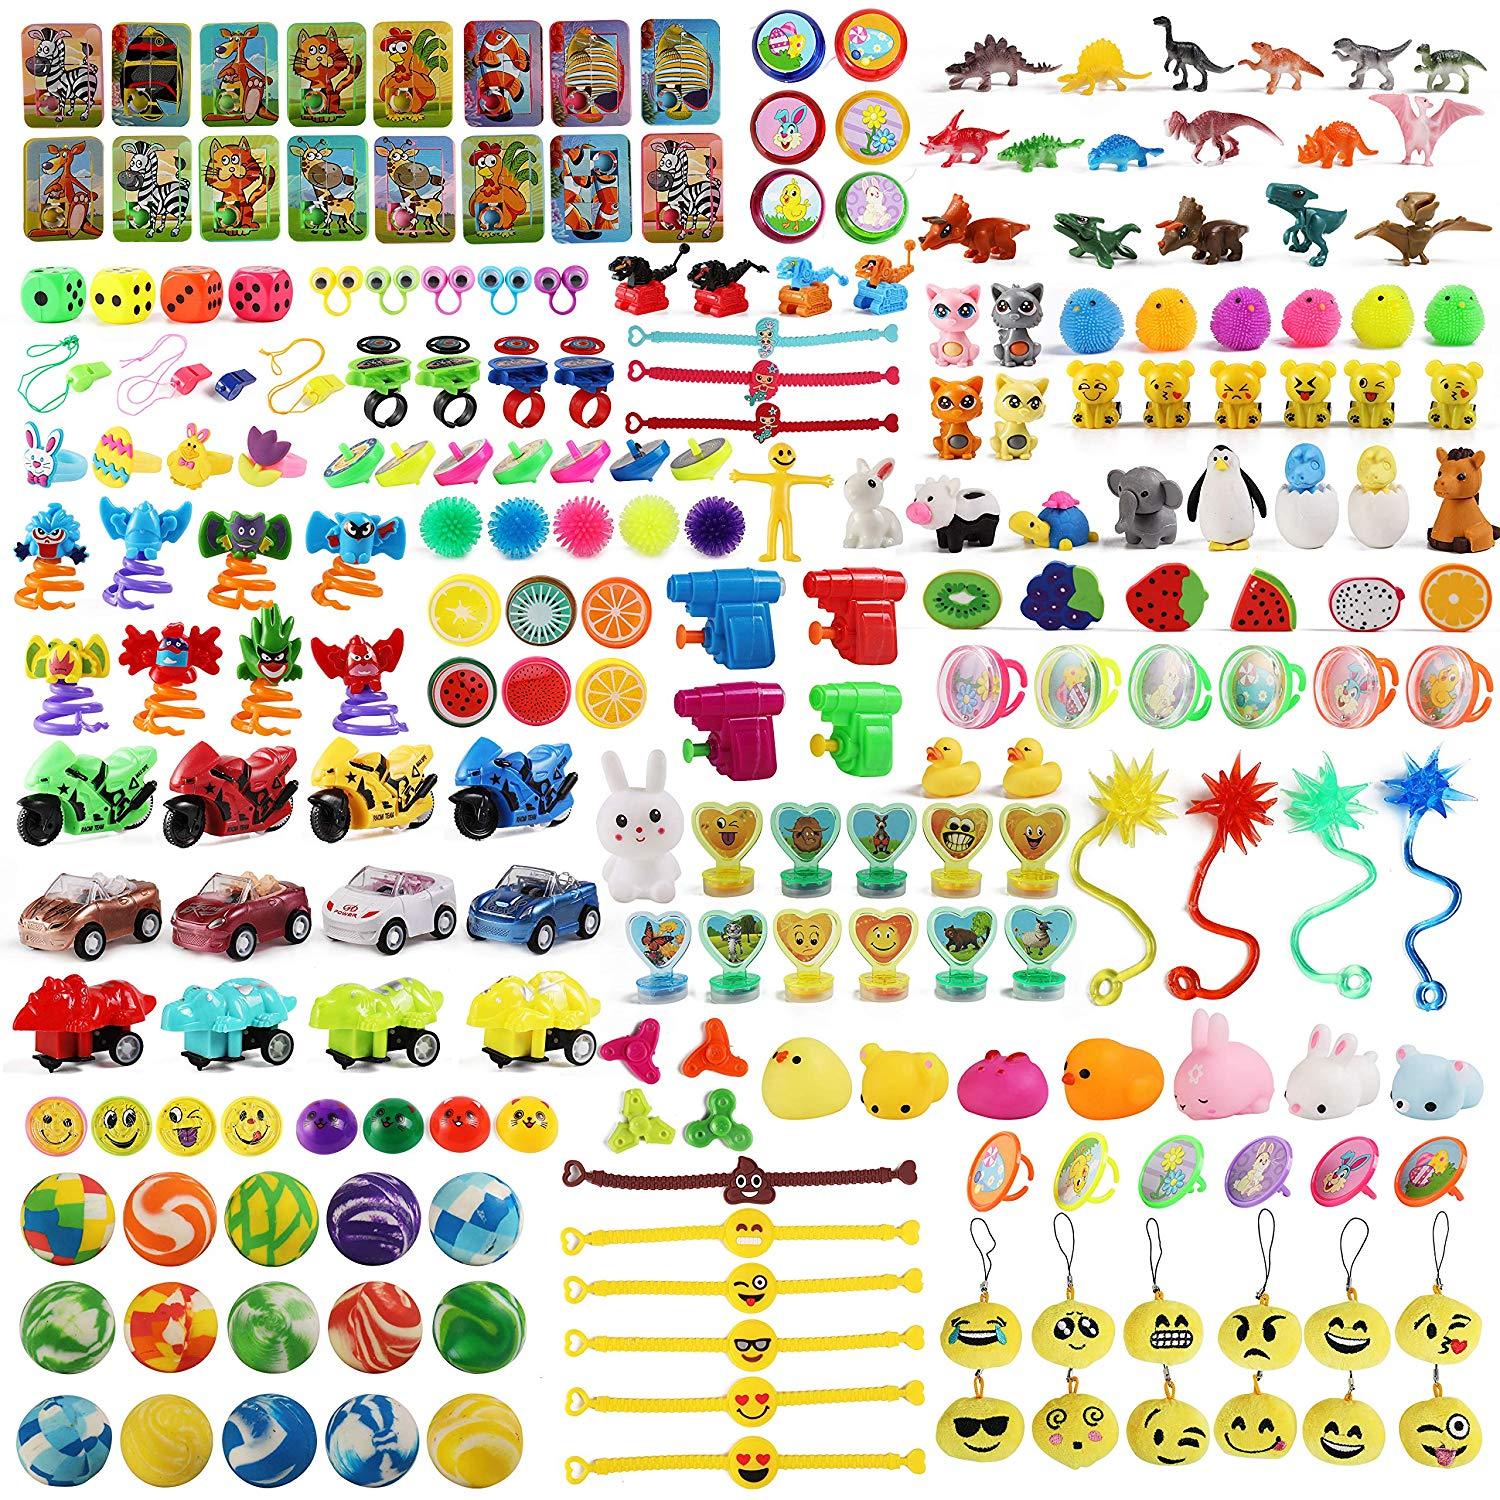 80 Easter Eggs With Novelty Toys